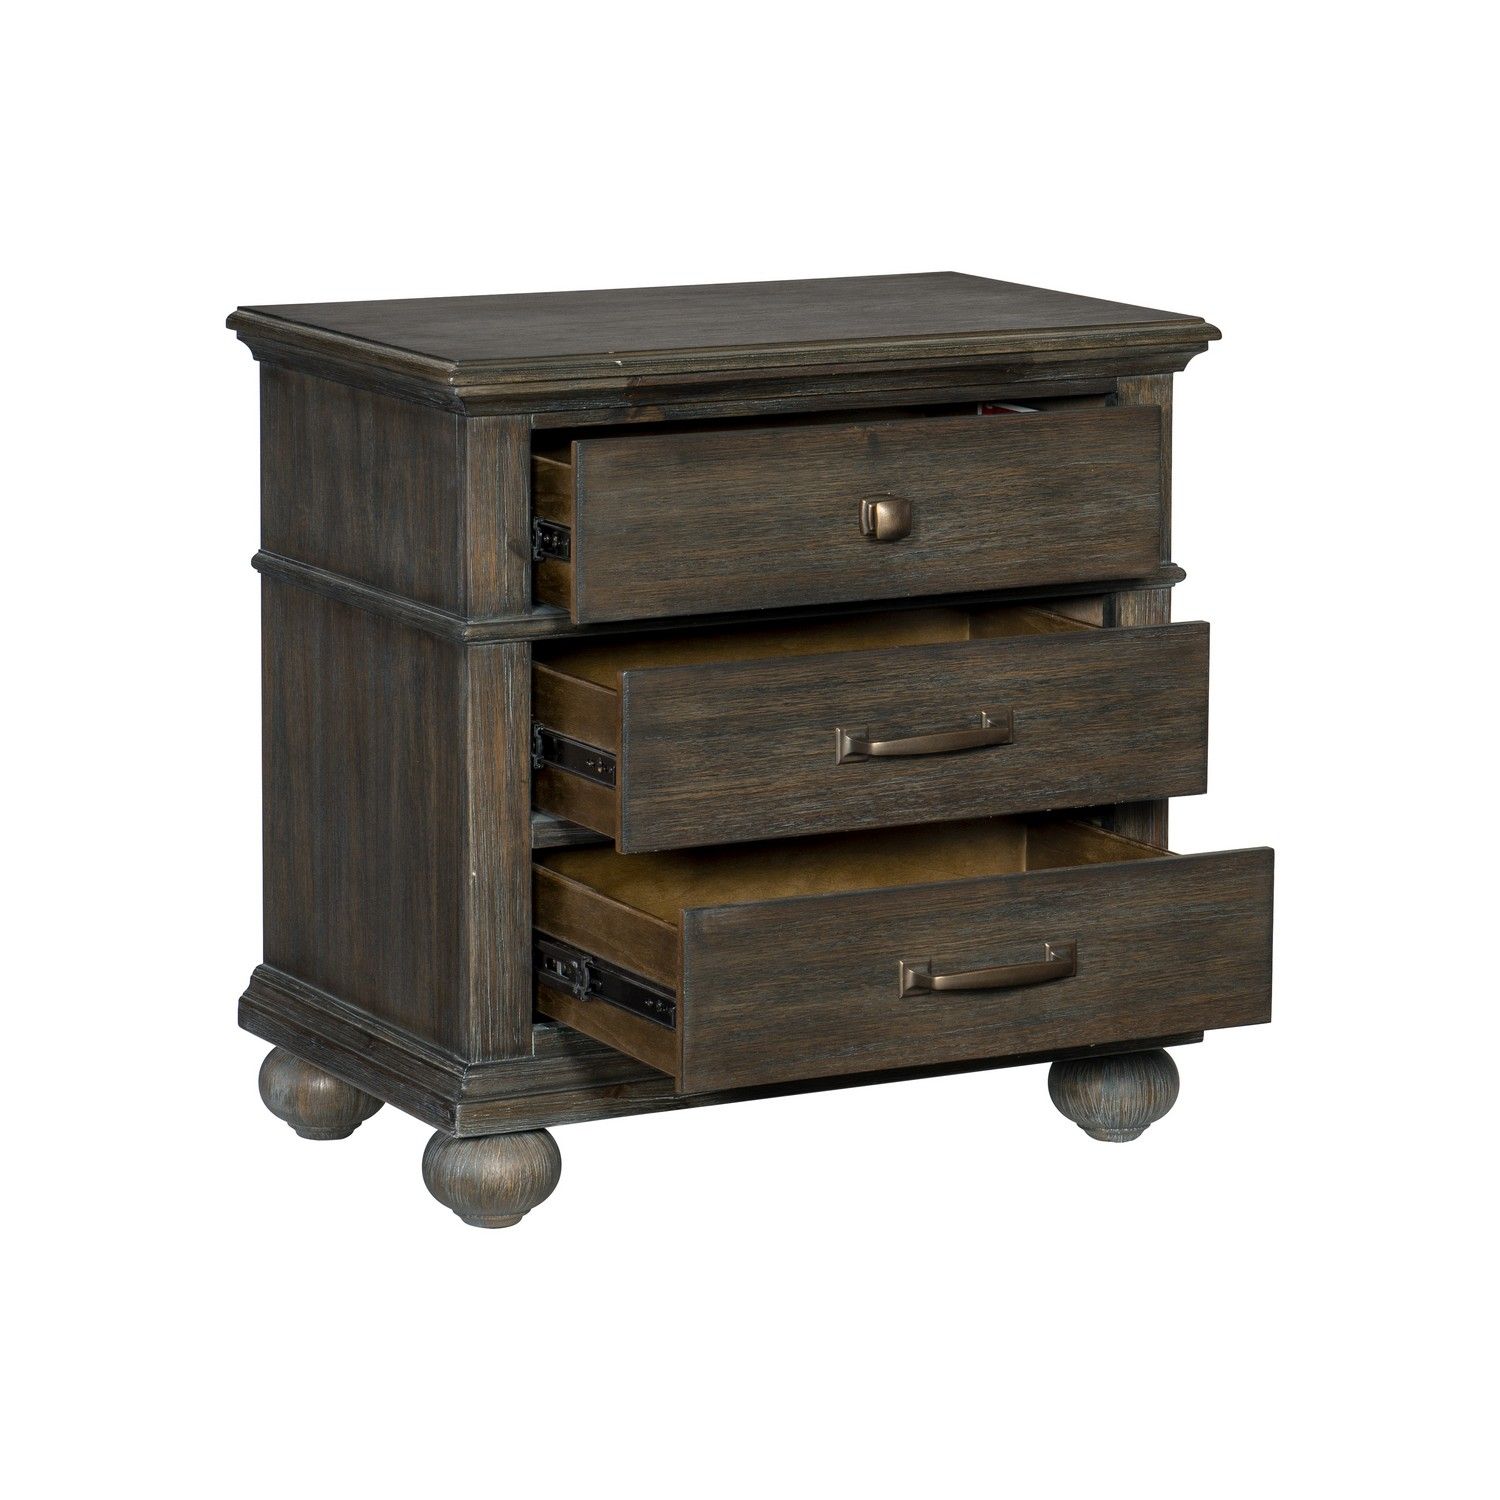 Homelegance Motsinger Night Stand - Wire-brushed Rustic Brown